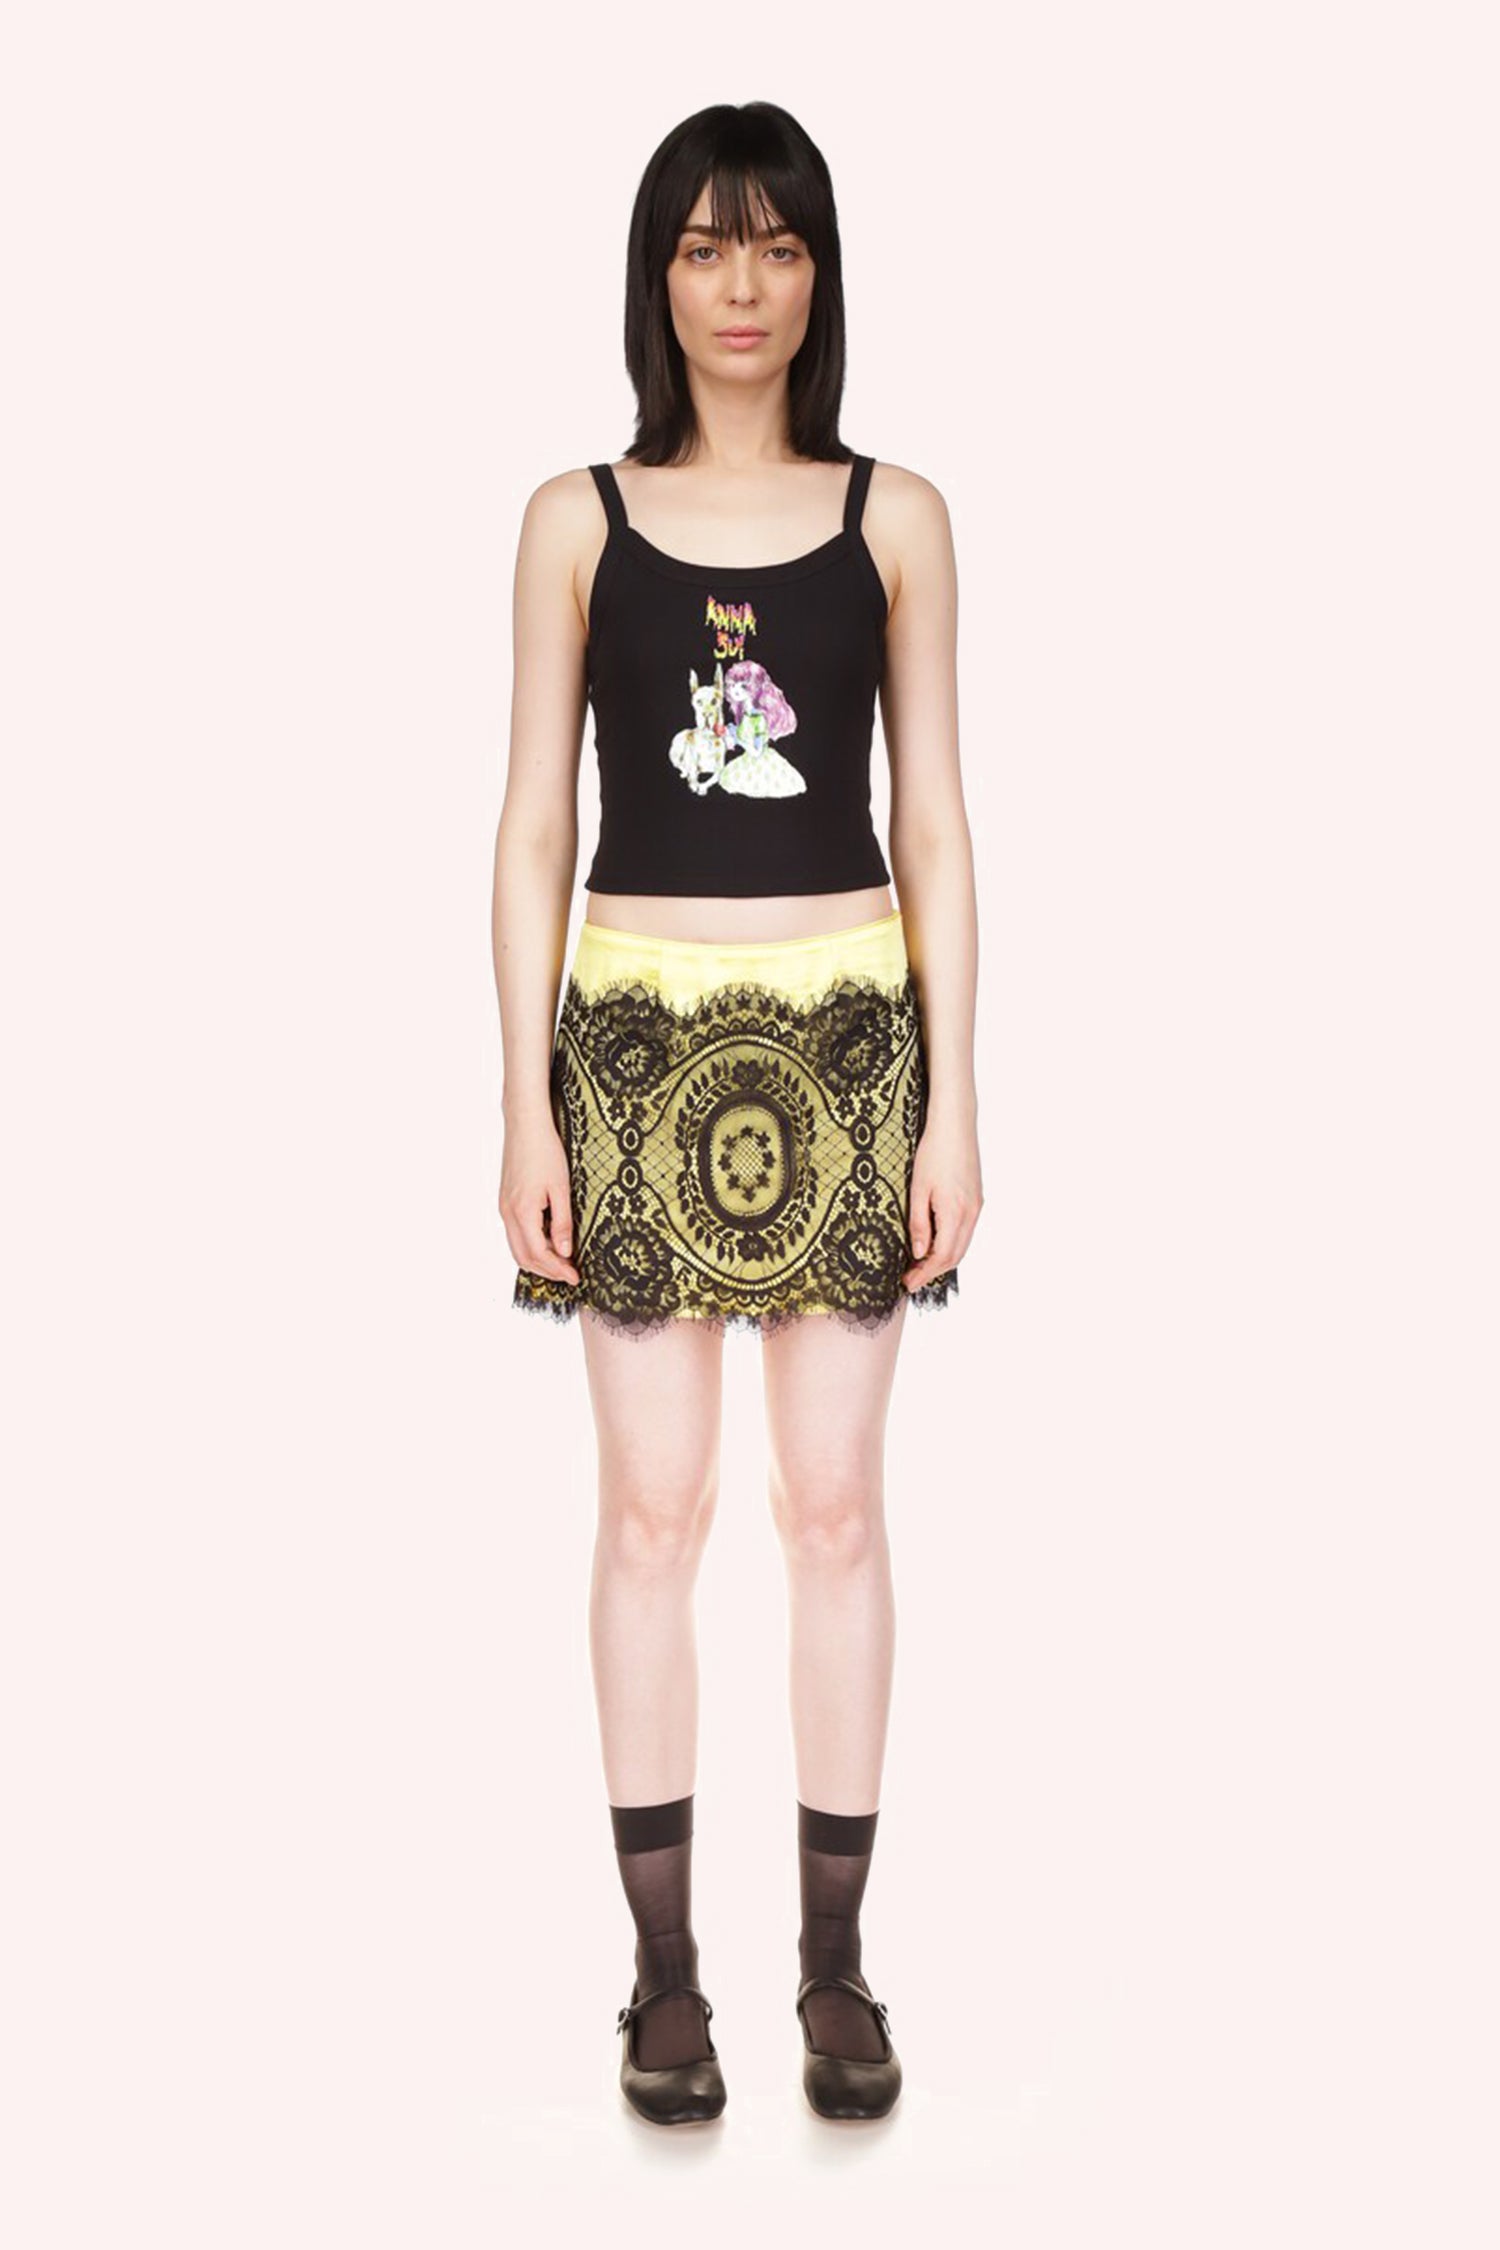 Tank Black, sleeveless Anna Sui logo above a little girl with pink hair and a large white dog